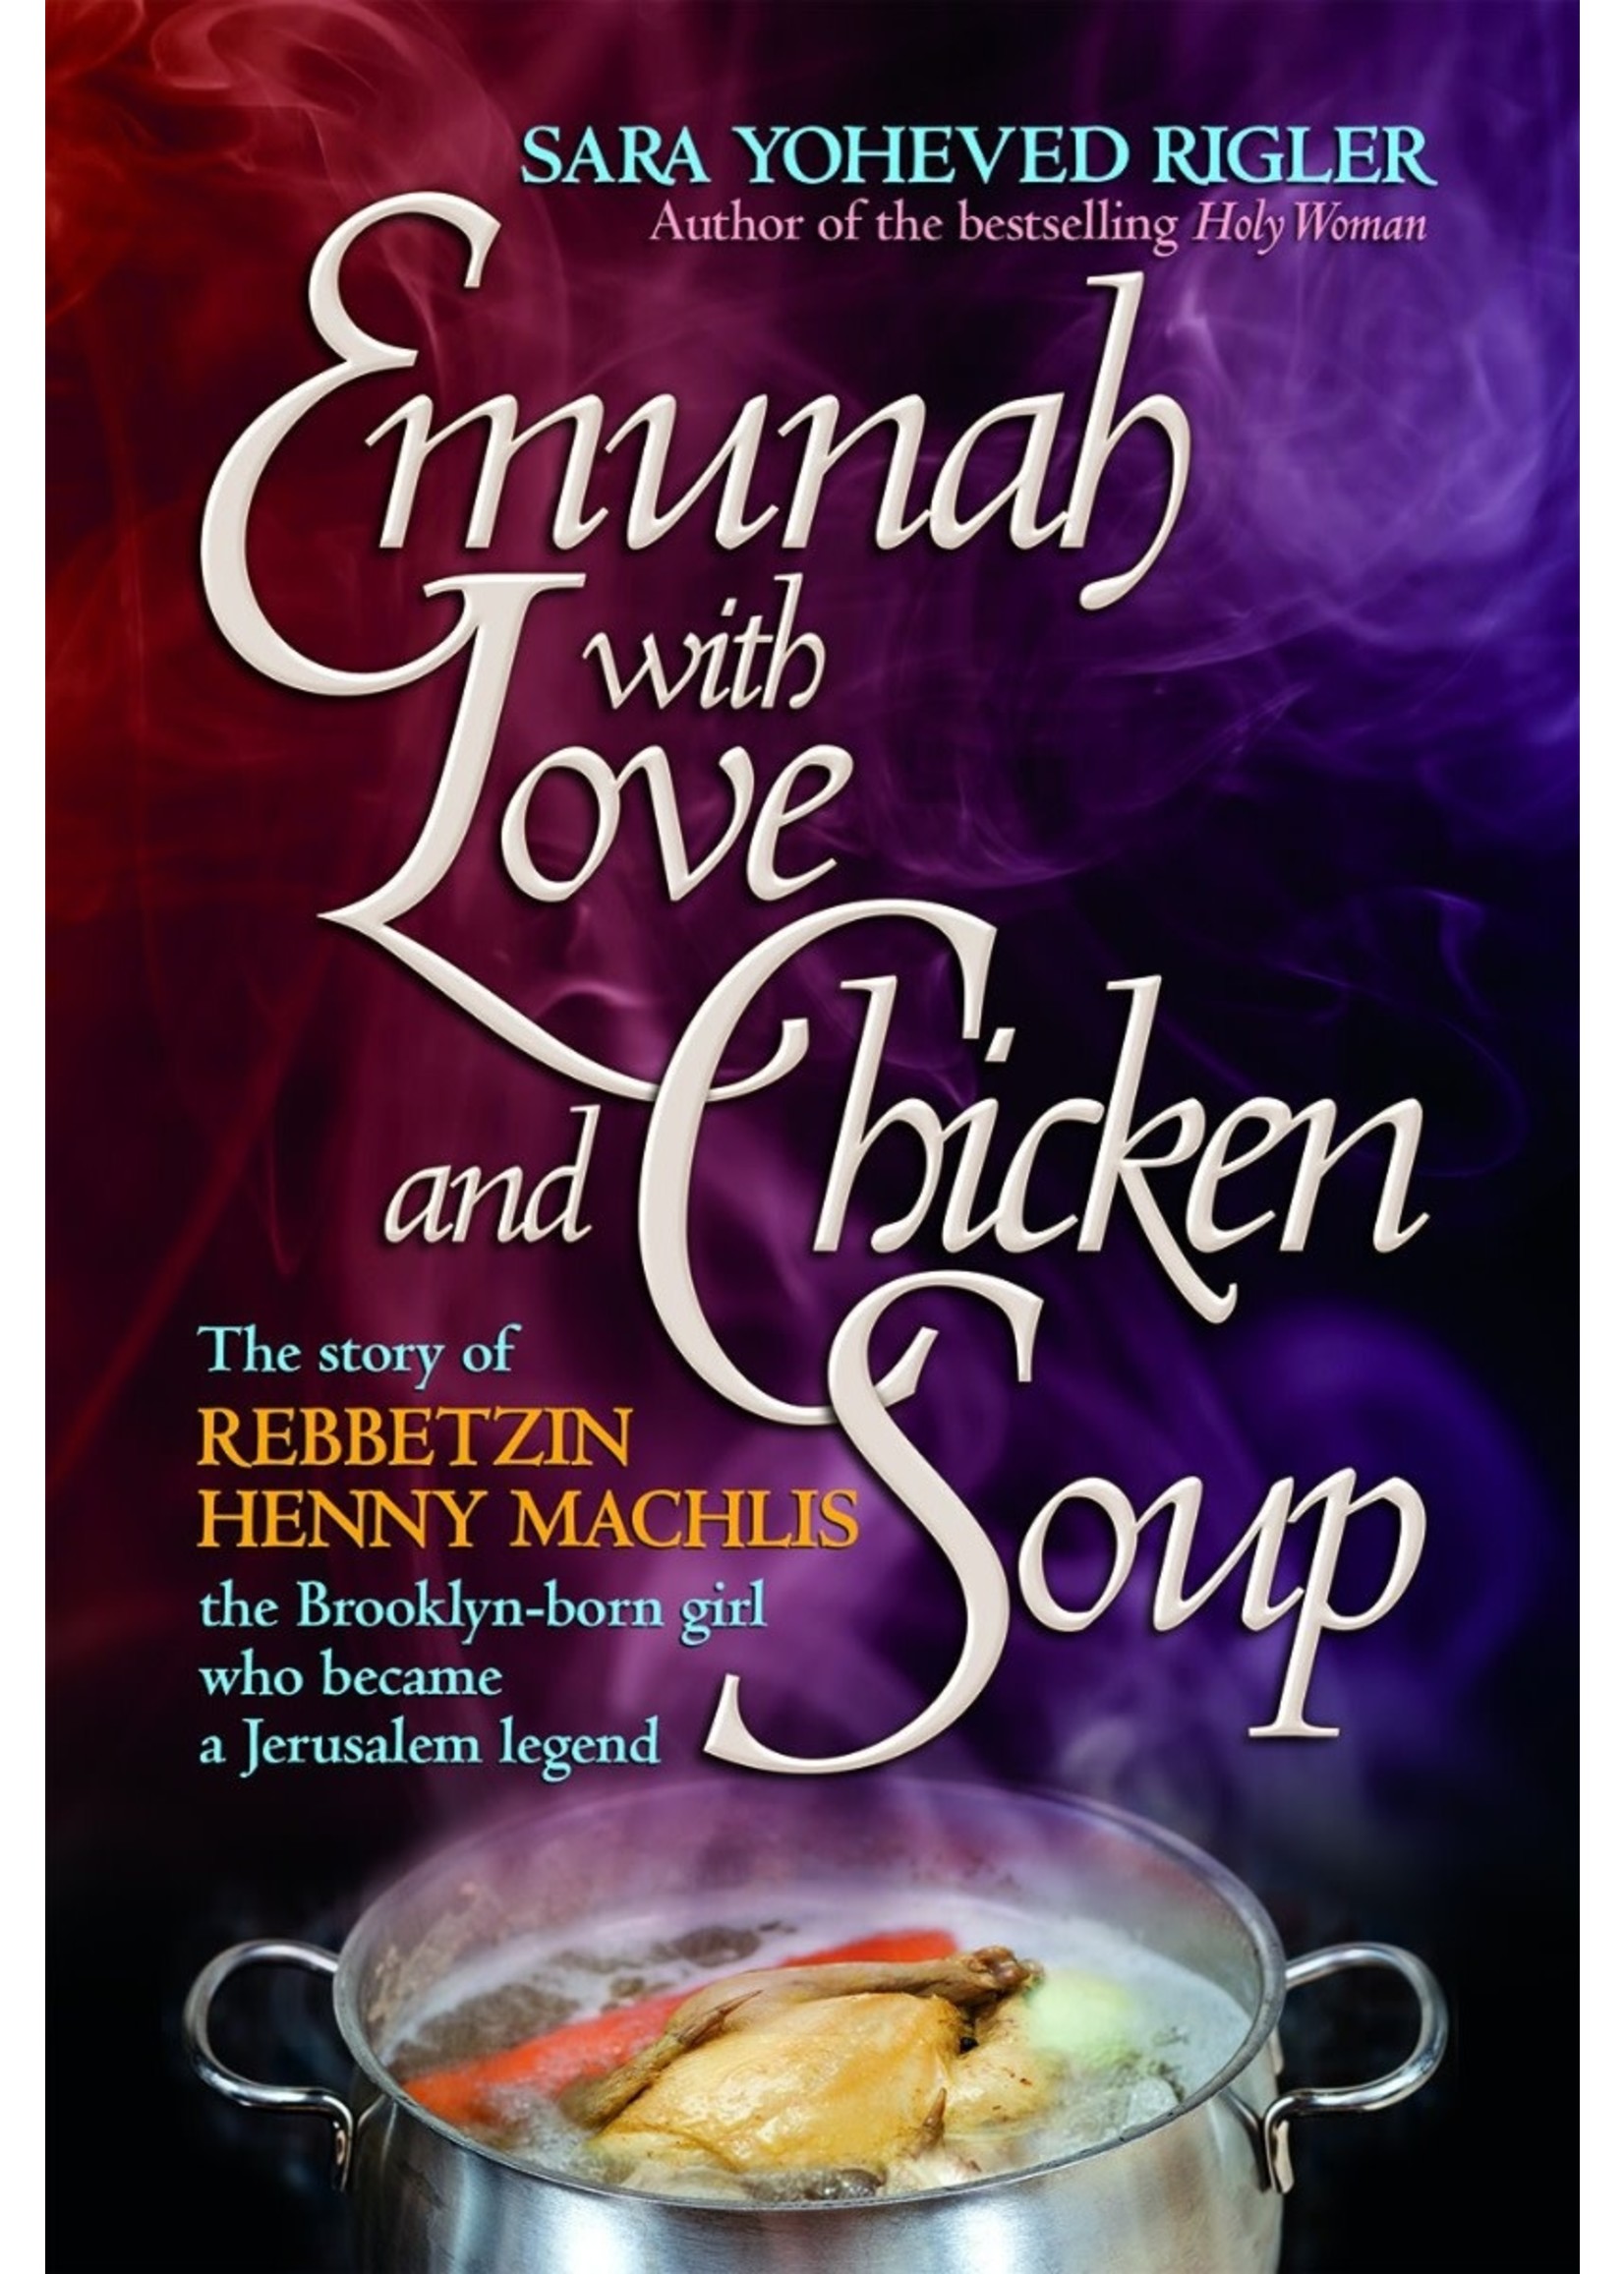 EMUNAH WITH LOVE AND CHICKEN